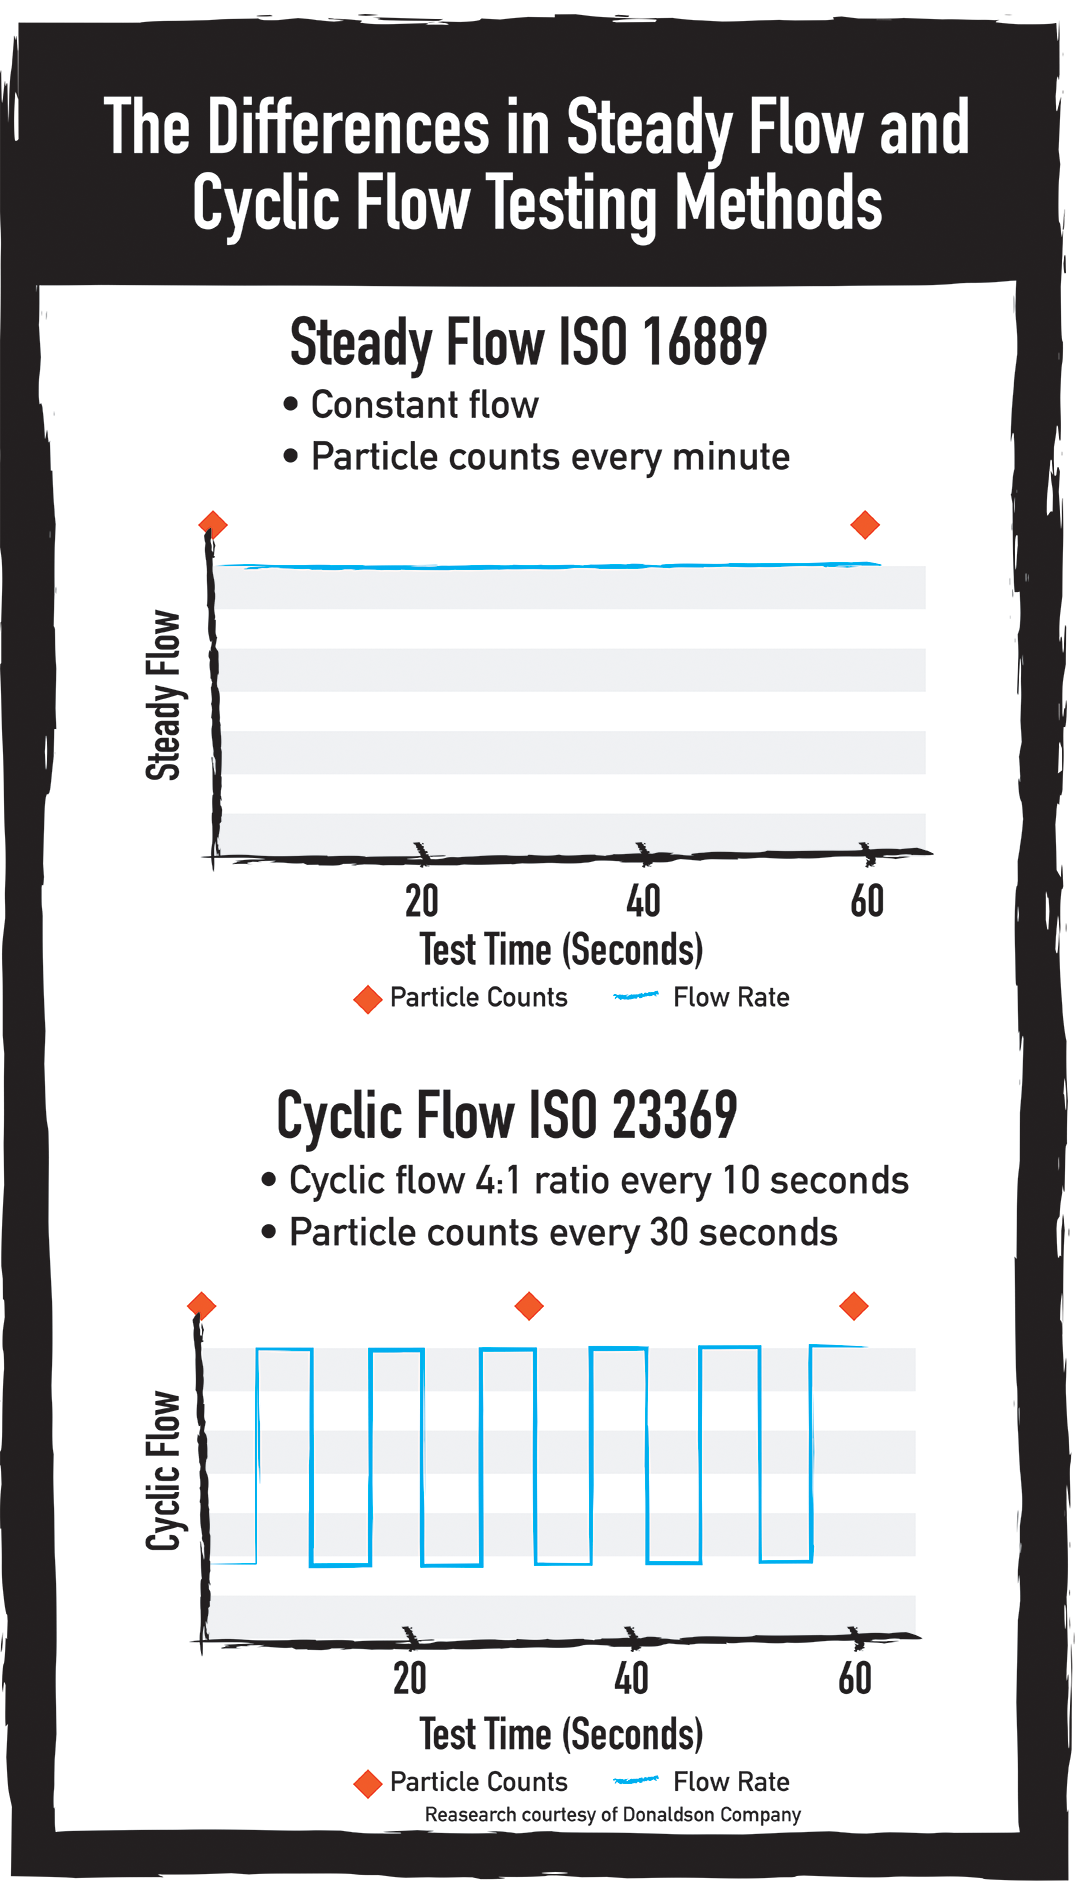 The Differences in Steady Flow and Cyclic Flow Testing Methods